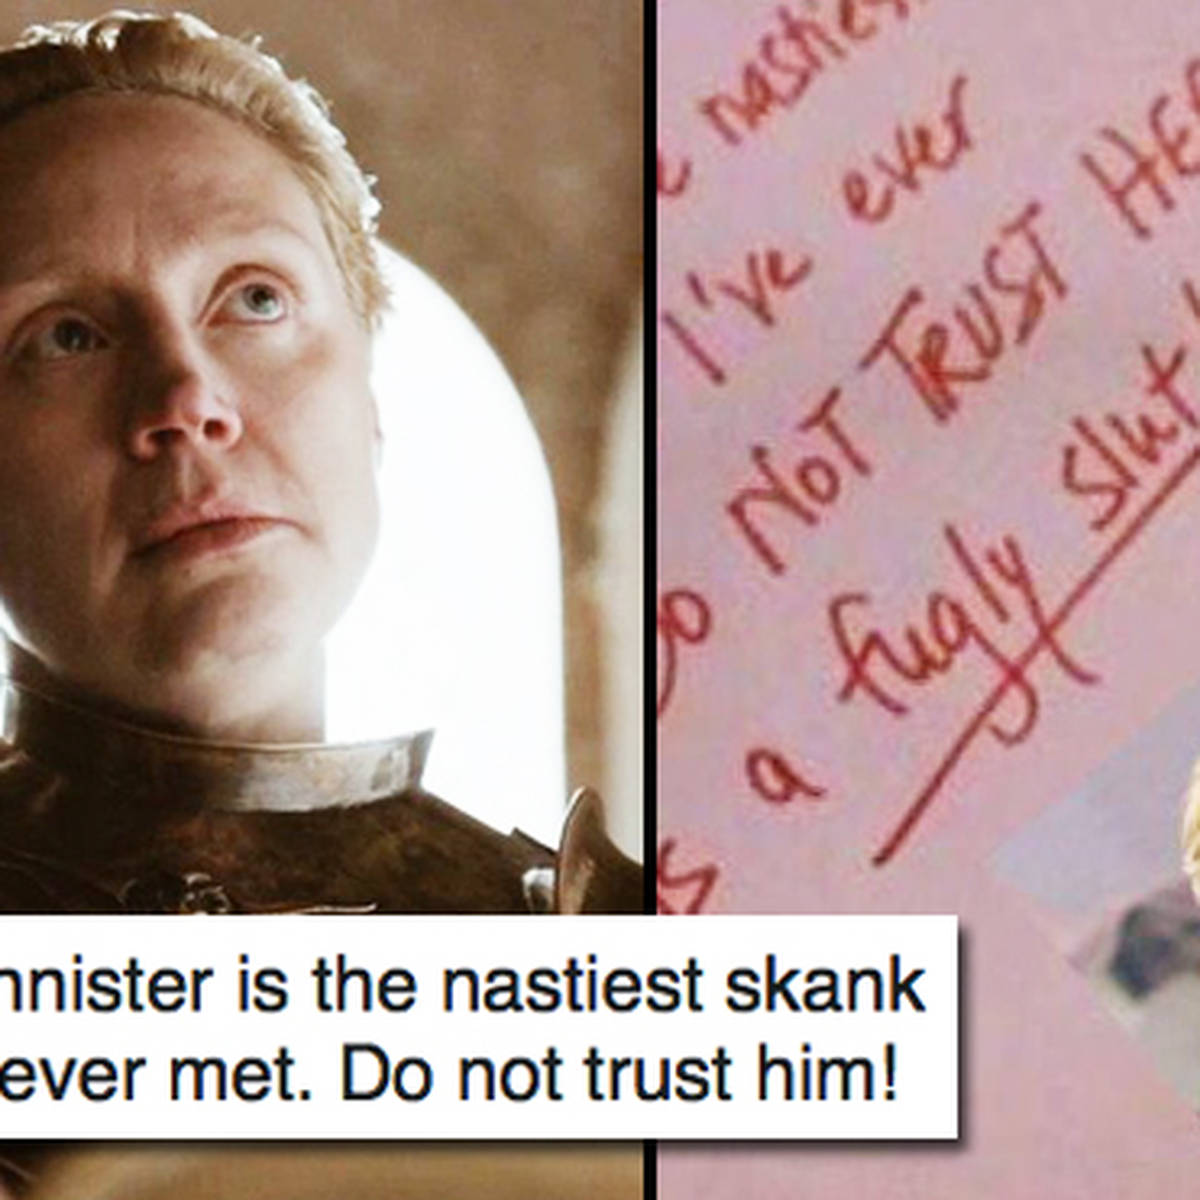 17 Memes From the 'Game of Thrones' Finale That Still Have Us Laughing